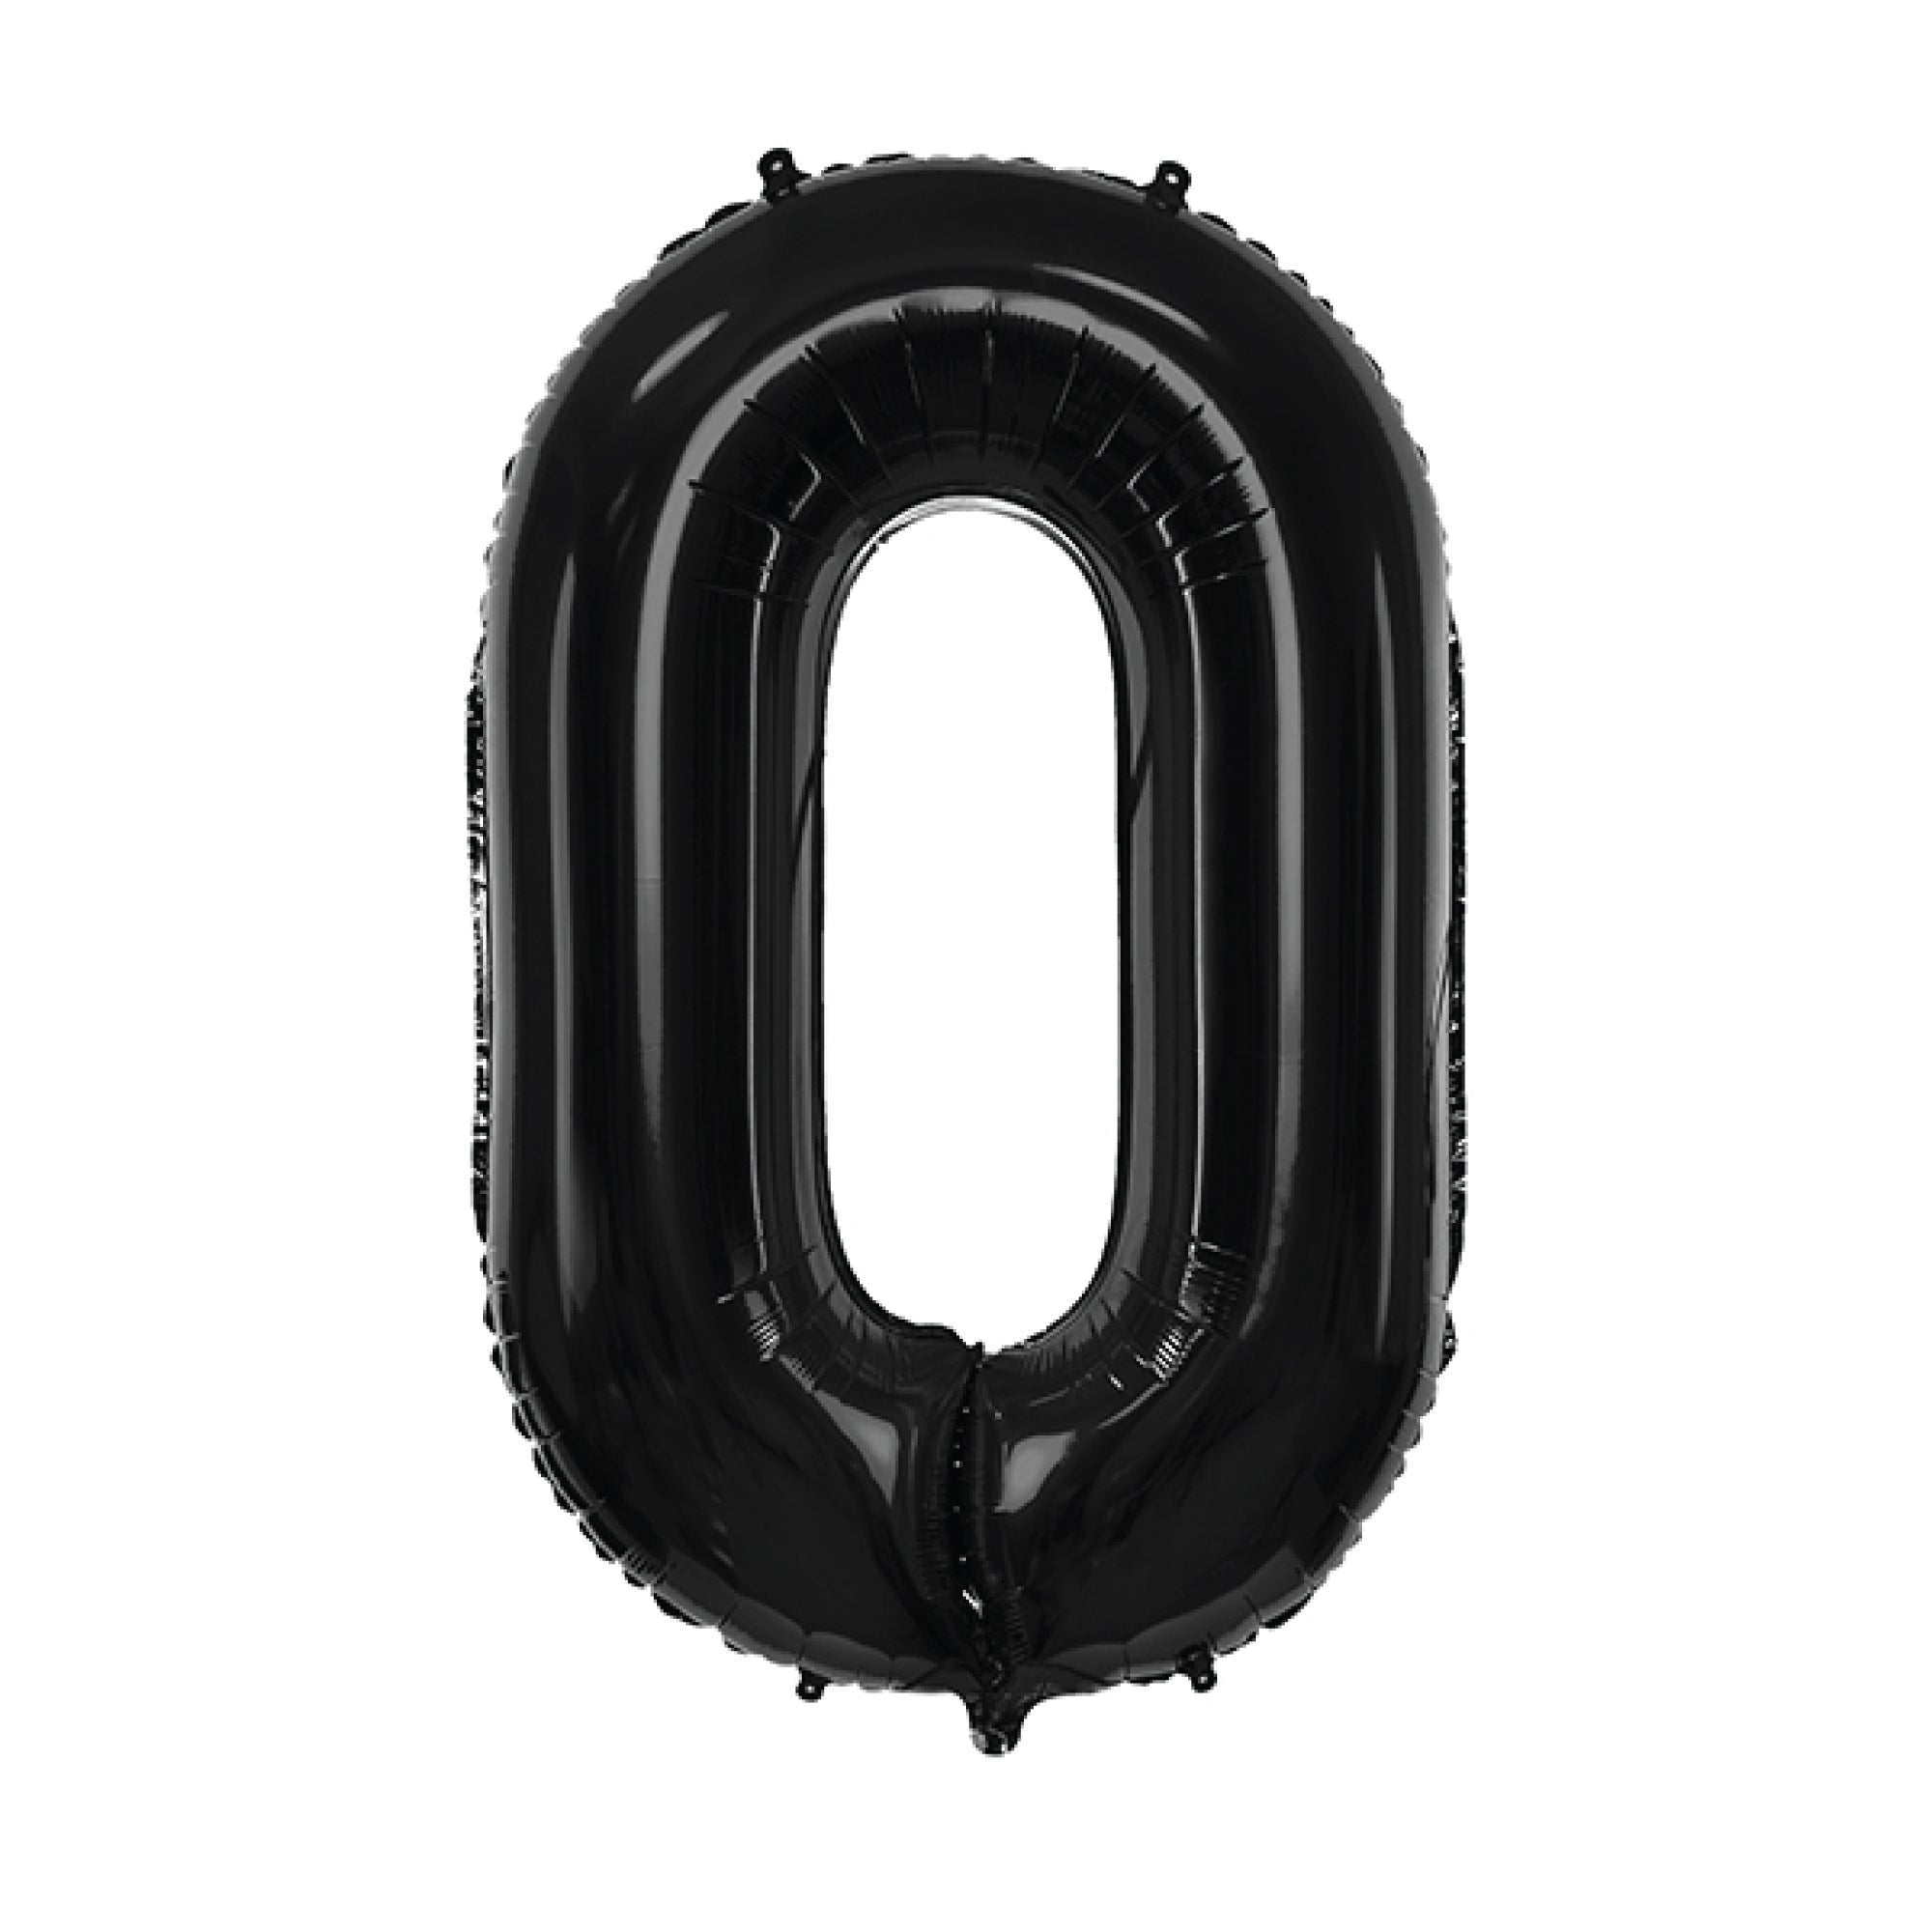 34" Black Giant Number Balloon 0-9 | The Party Darling